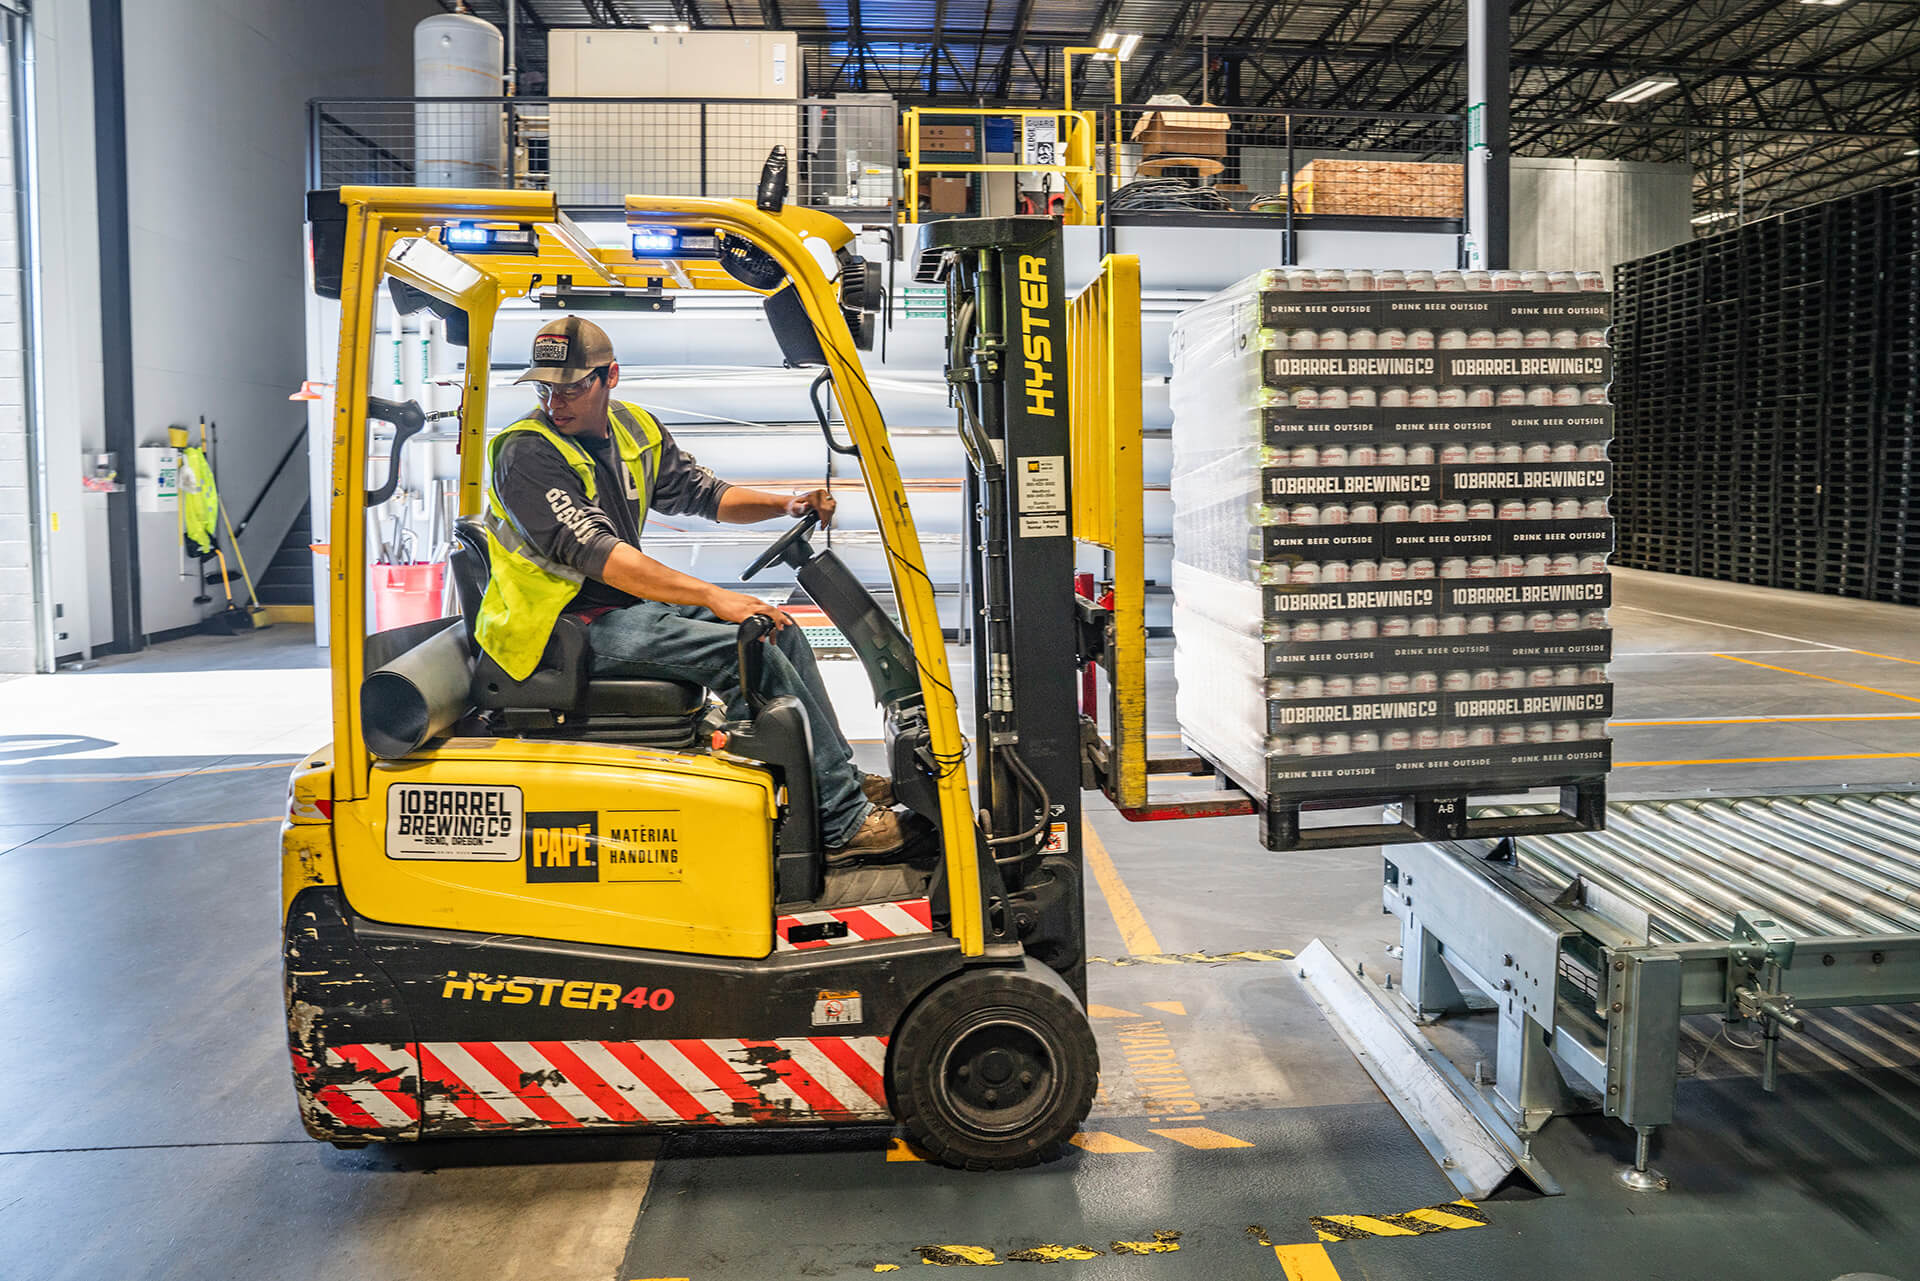 Photograph of worker operating forklift in warehouse